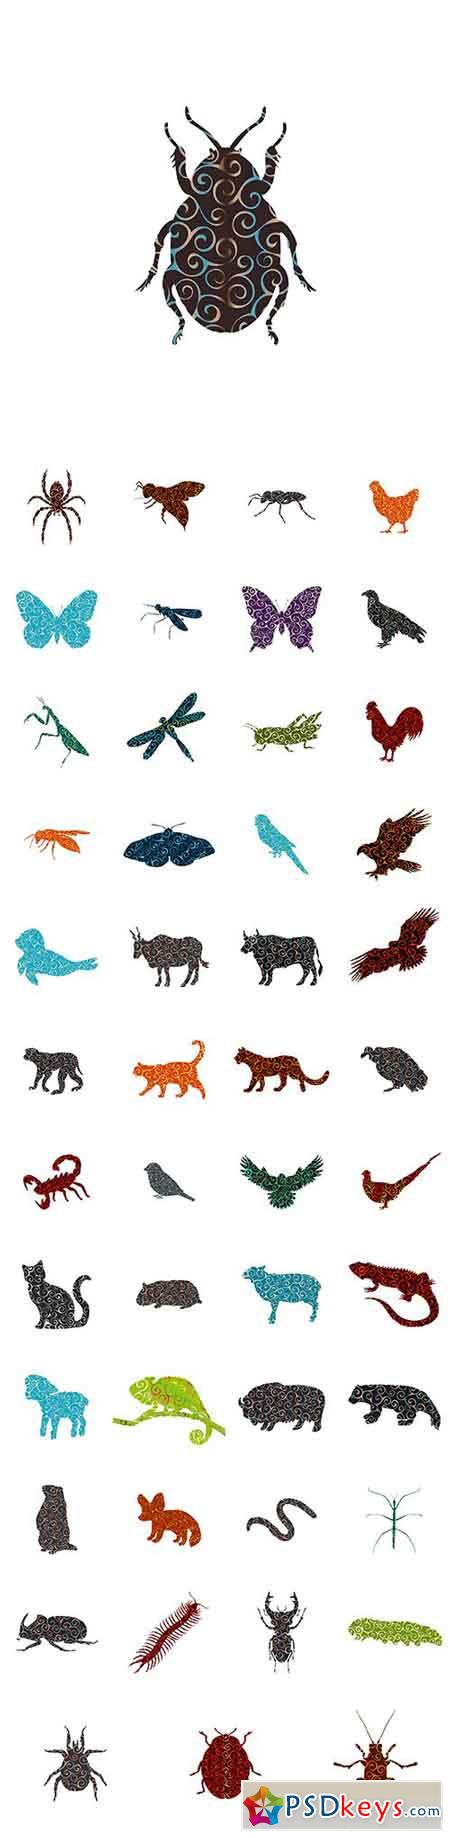 Spiral pattern color silhouette animal